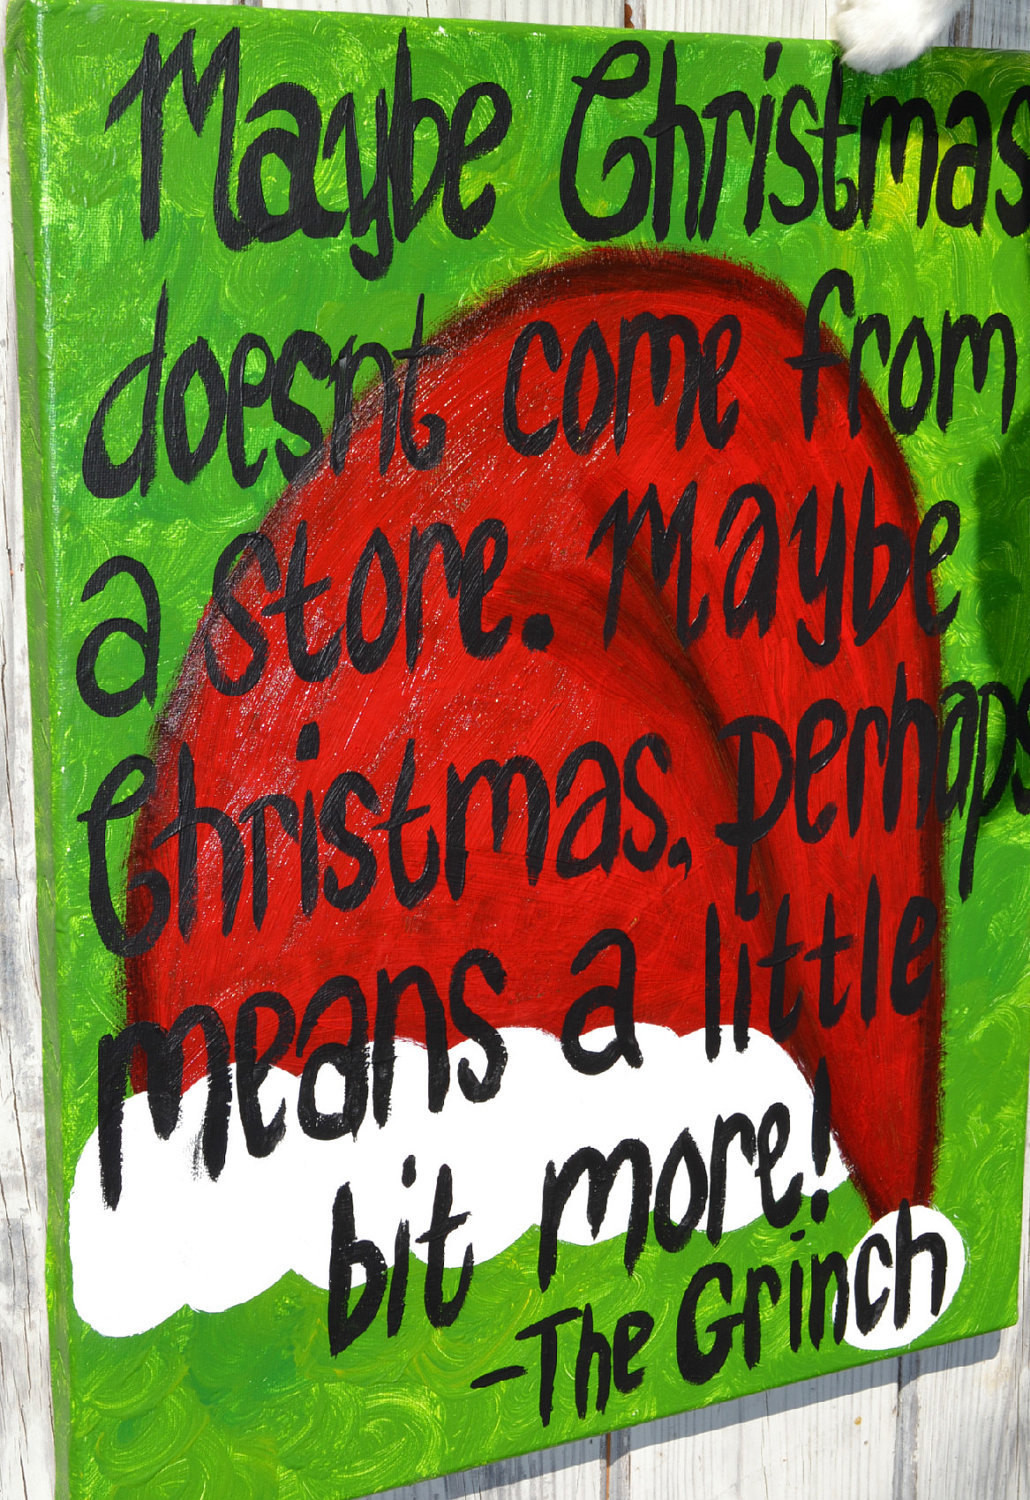 Grinch Quotes About Christmas
 Grinch Christmas Quote on 16x20 Canvas